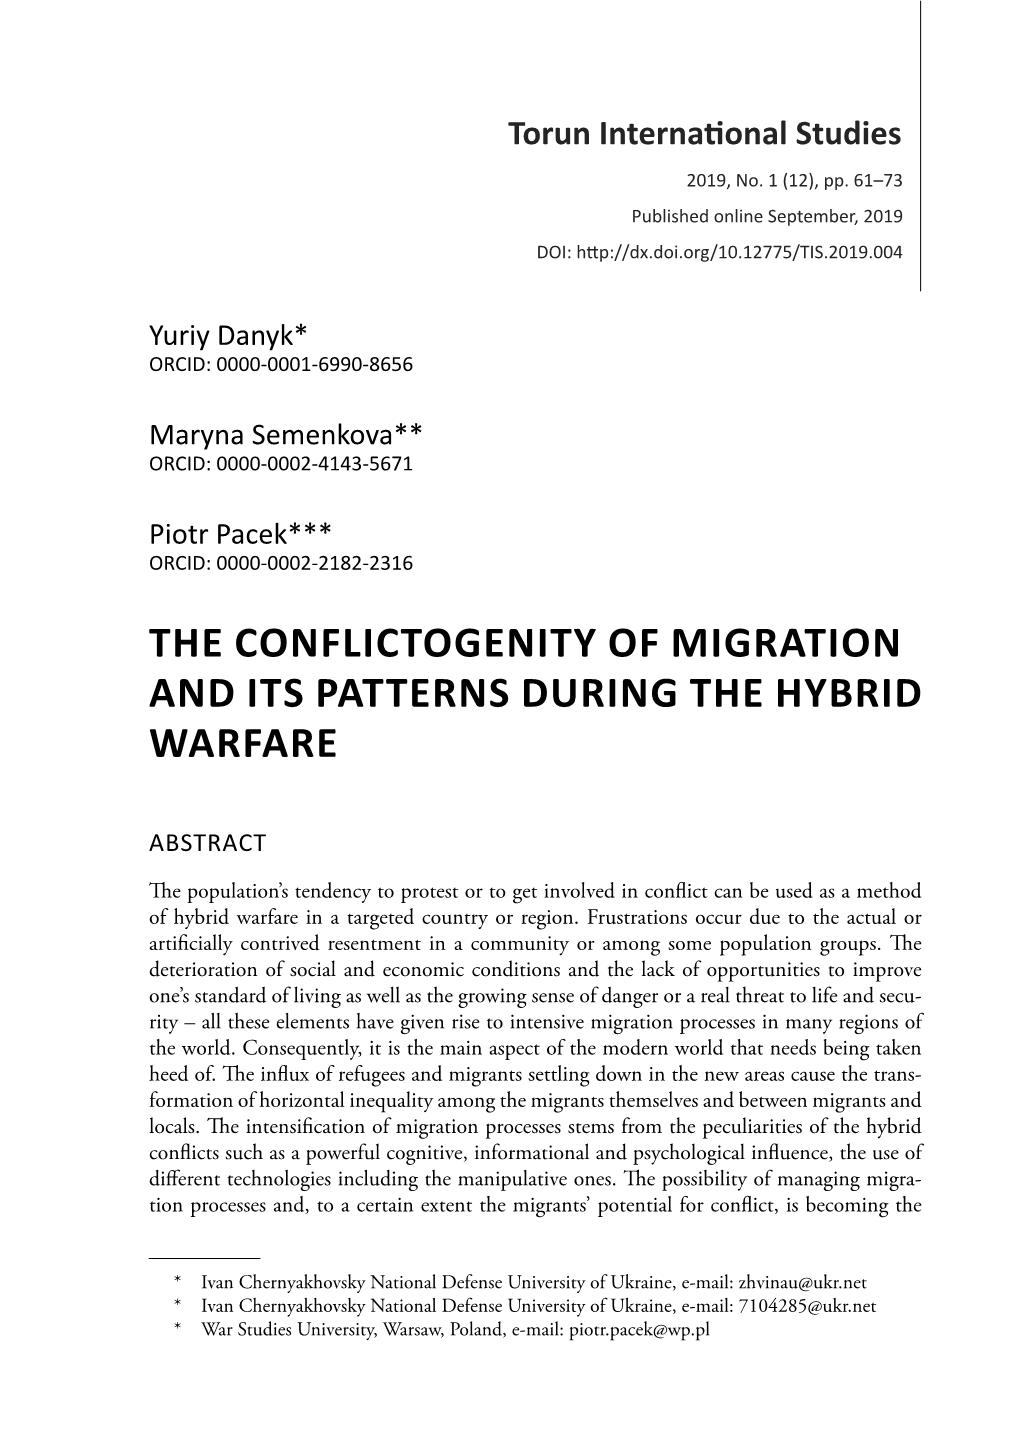 Patterns of the Migration During the Hybrid Warfare and Its Conflictogenity